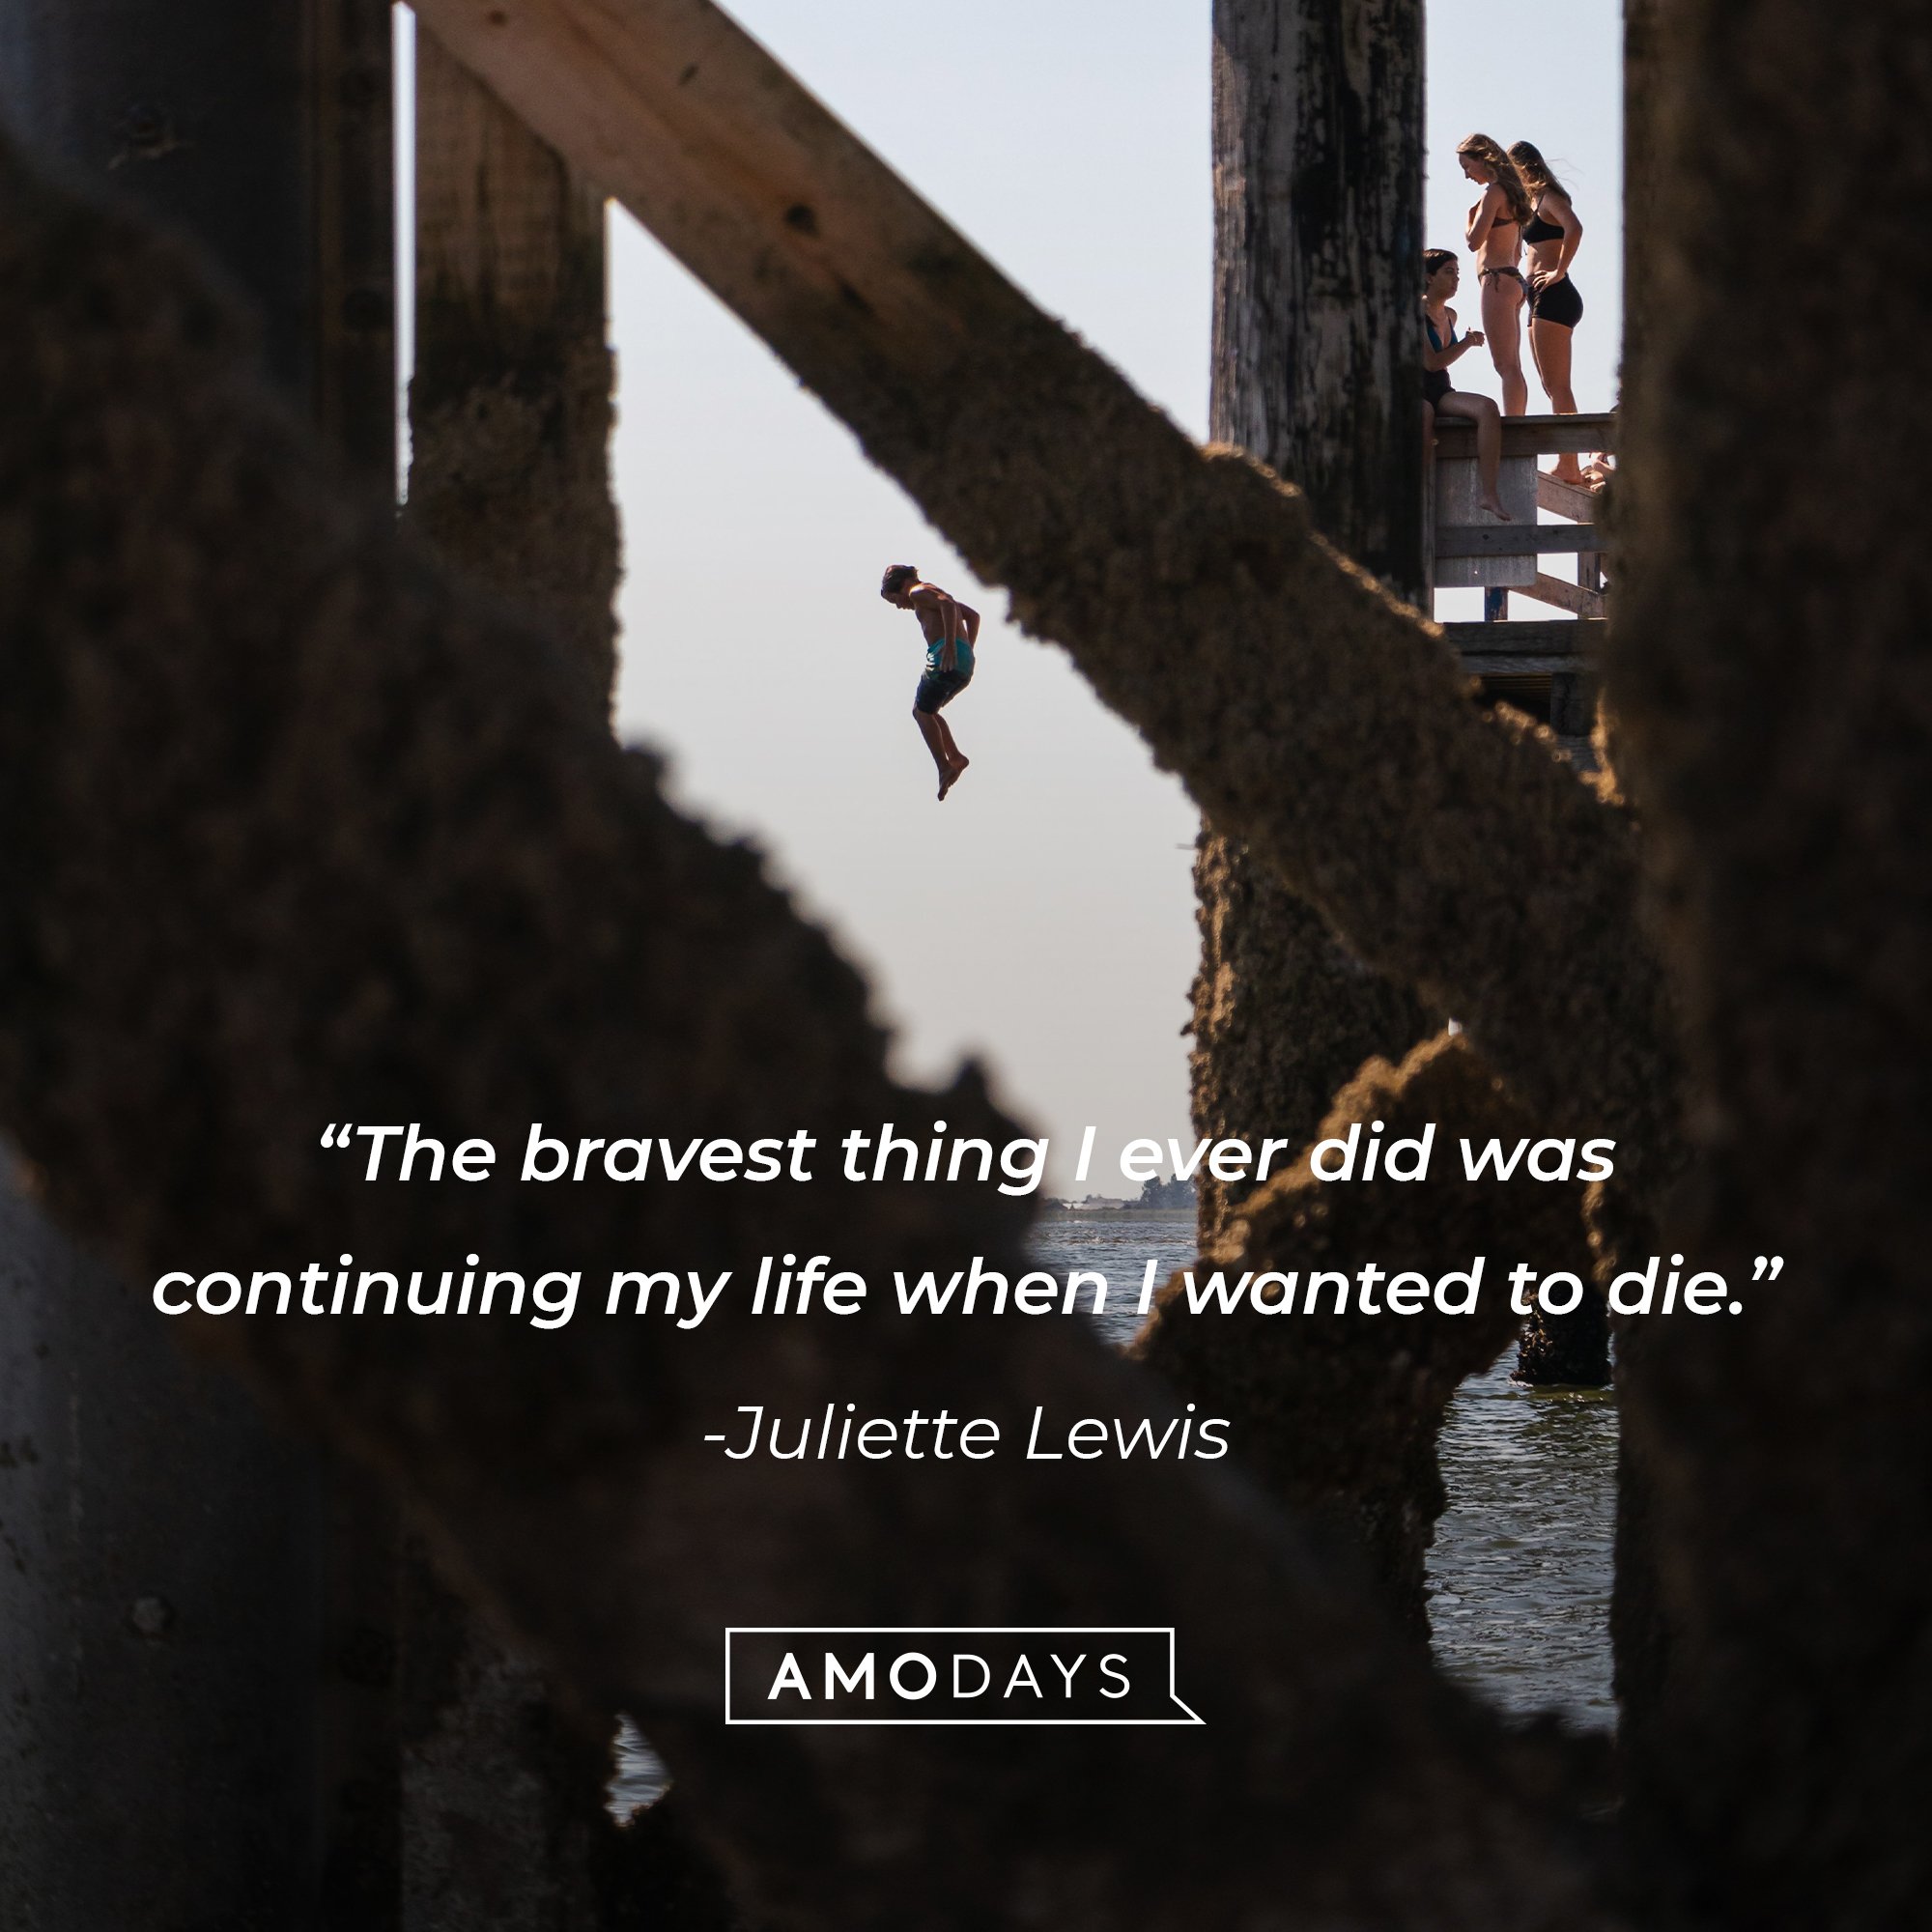  Juliette Lewis;s quote: “The bravest thing I ever did was continuing my life when I wanted to die.” | Image: AmoDays